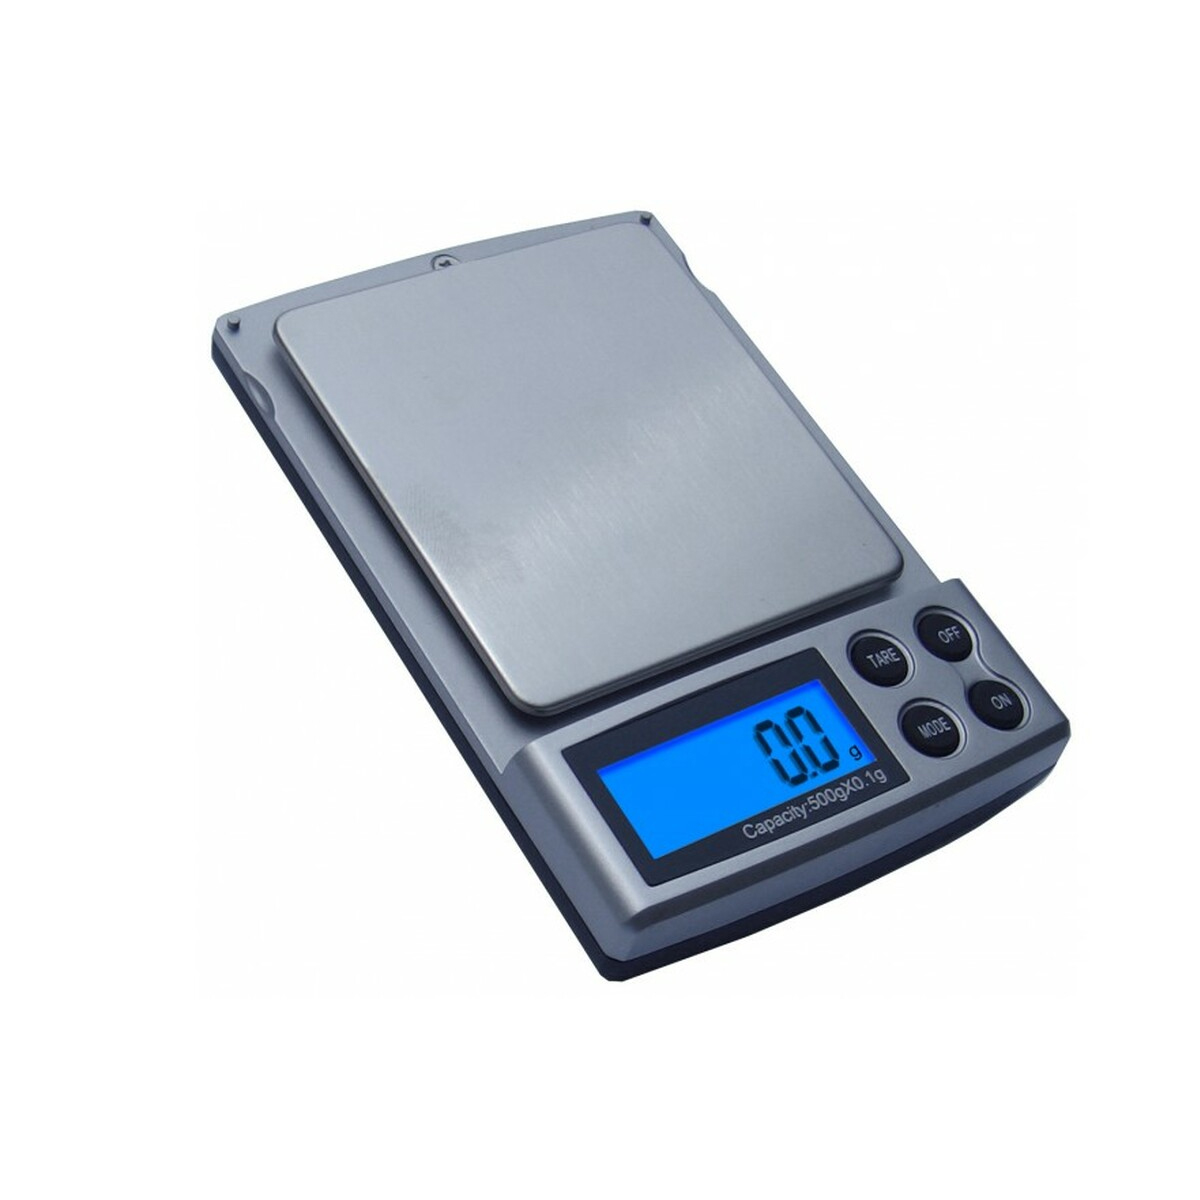 American Weigh Scale Scalemate SM-501 Digital Pocket Scale, Black, 500 x 0.01 G